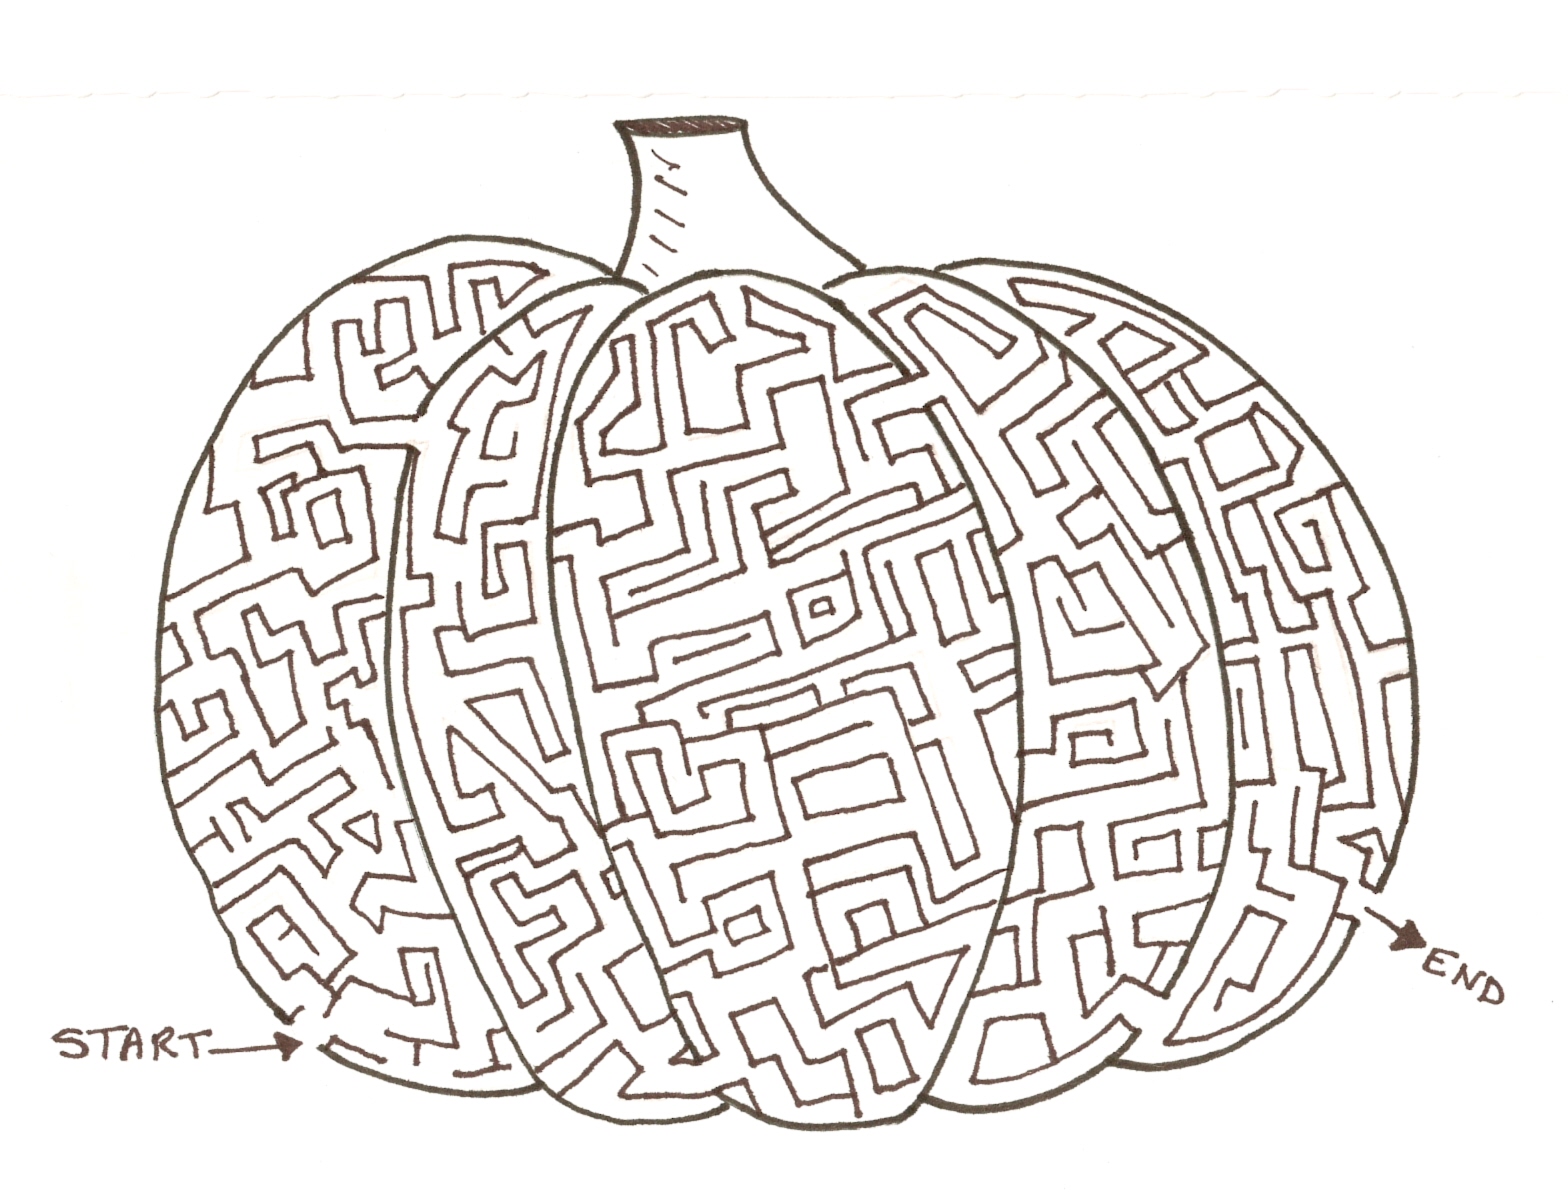 What's the easiest way to create a maze?